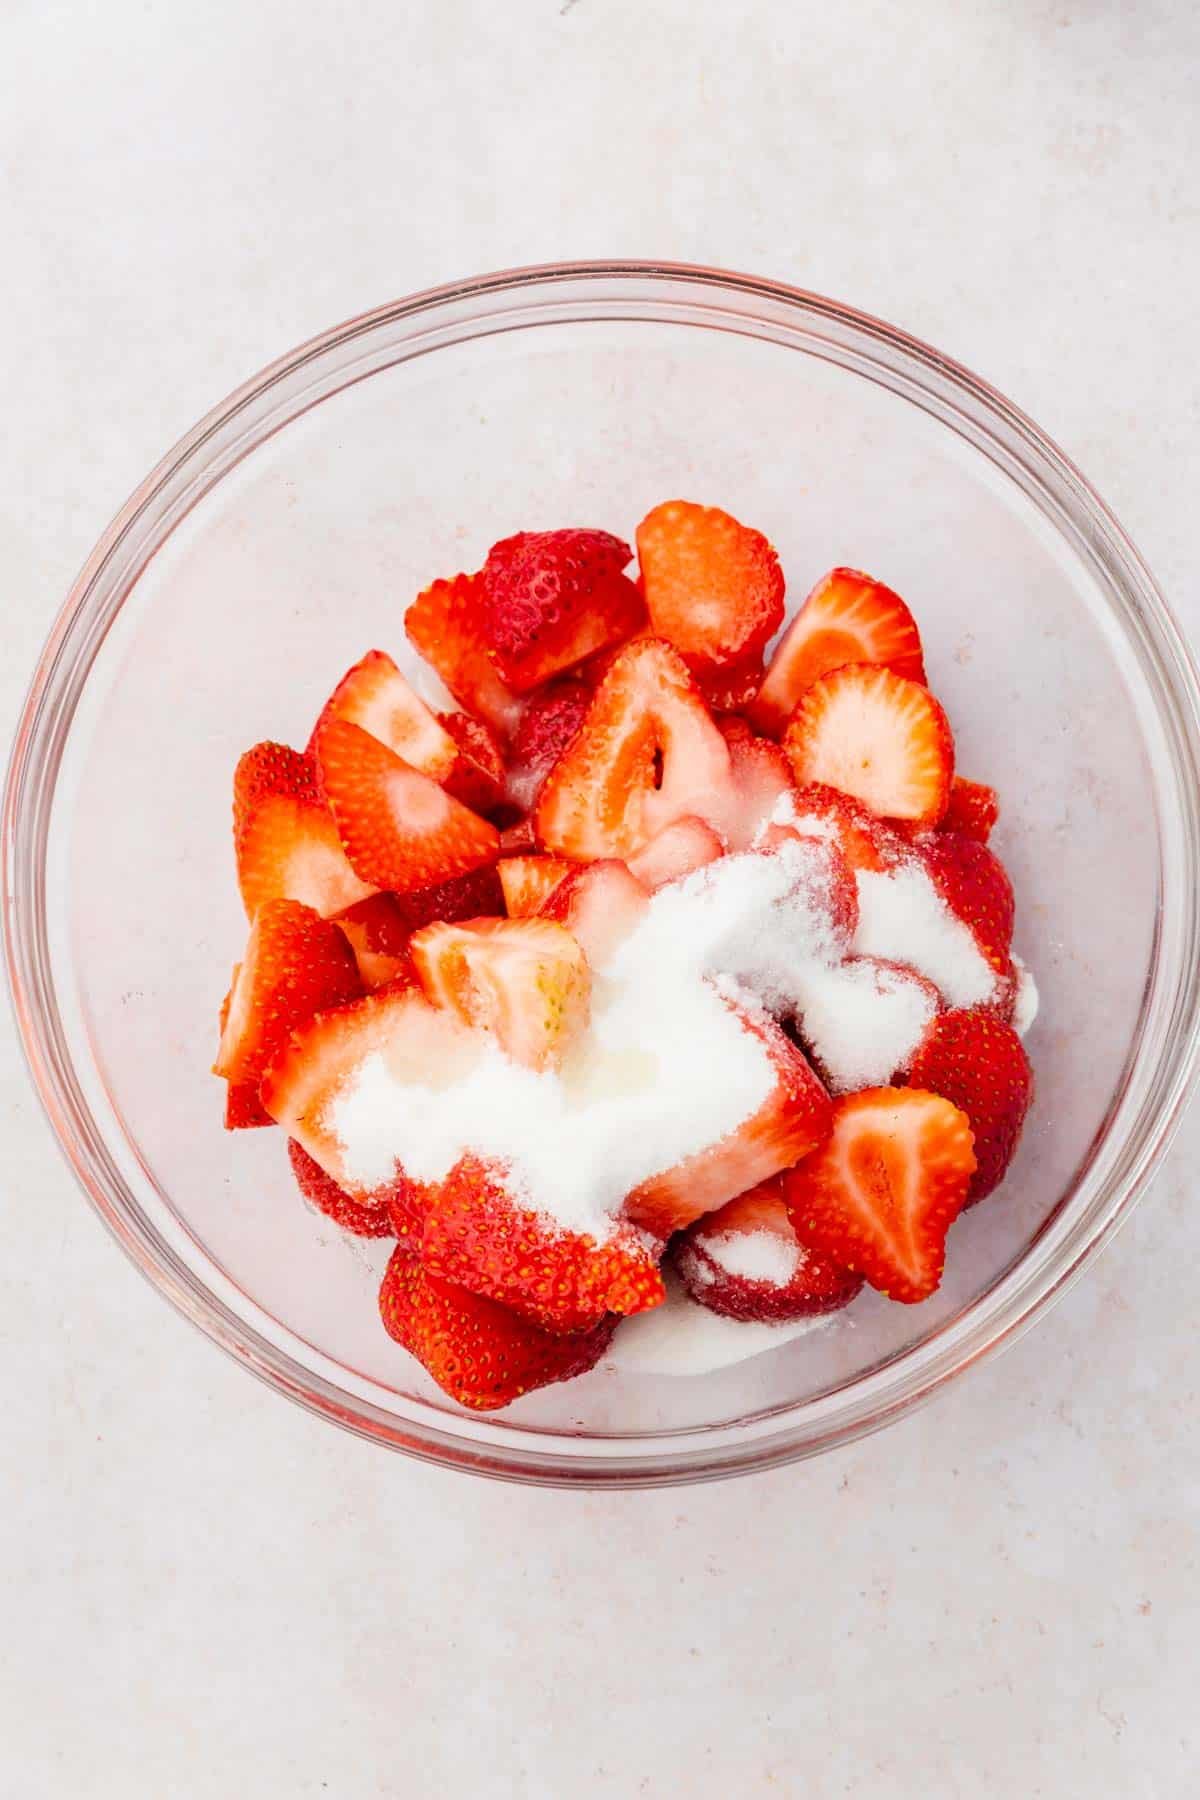 An overhead view of a mixing bowl with sliced strawberries, lemon juice and granulated sugar before mixing.